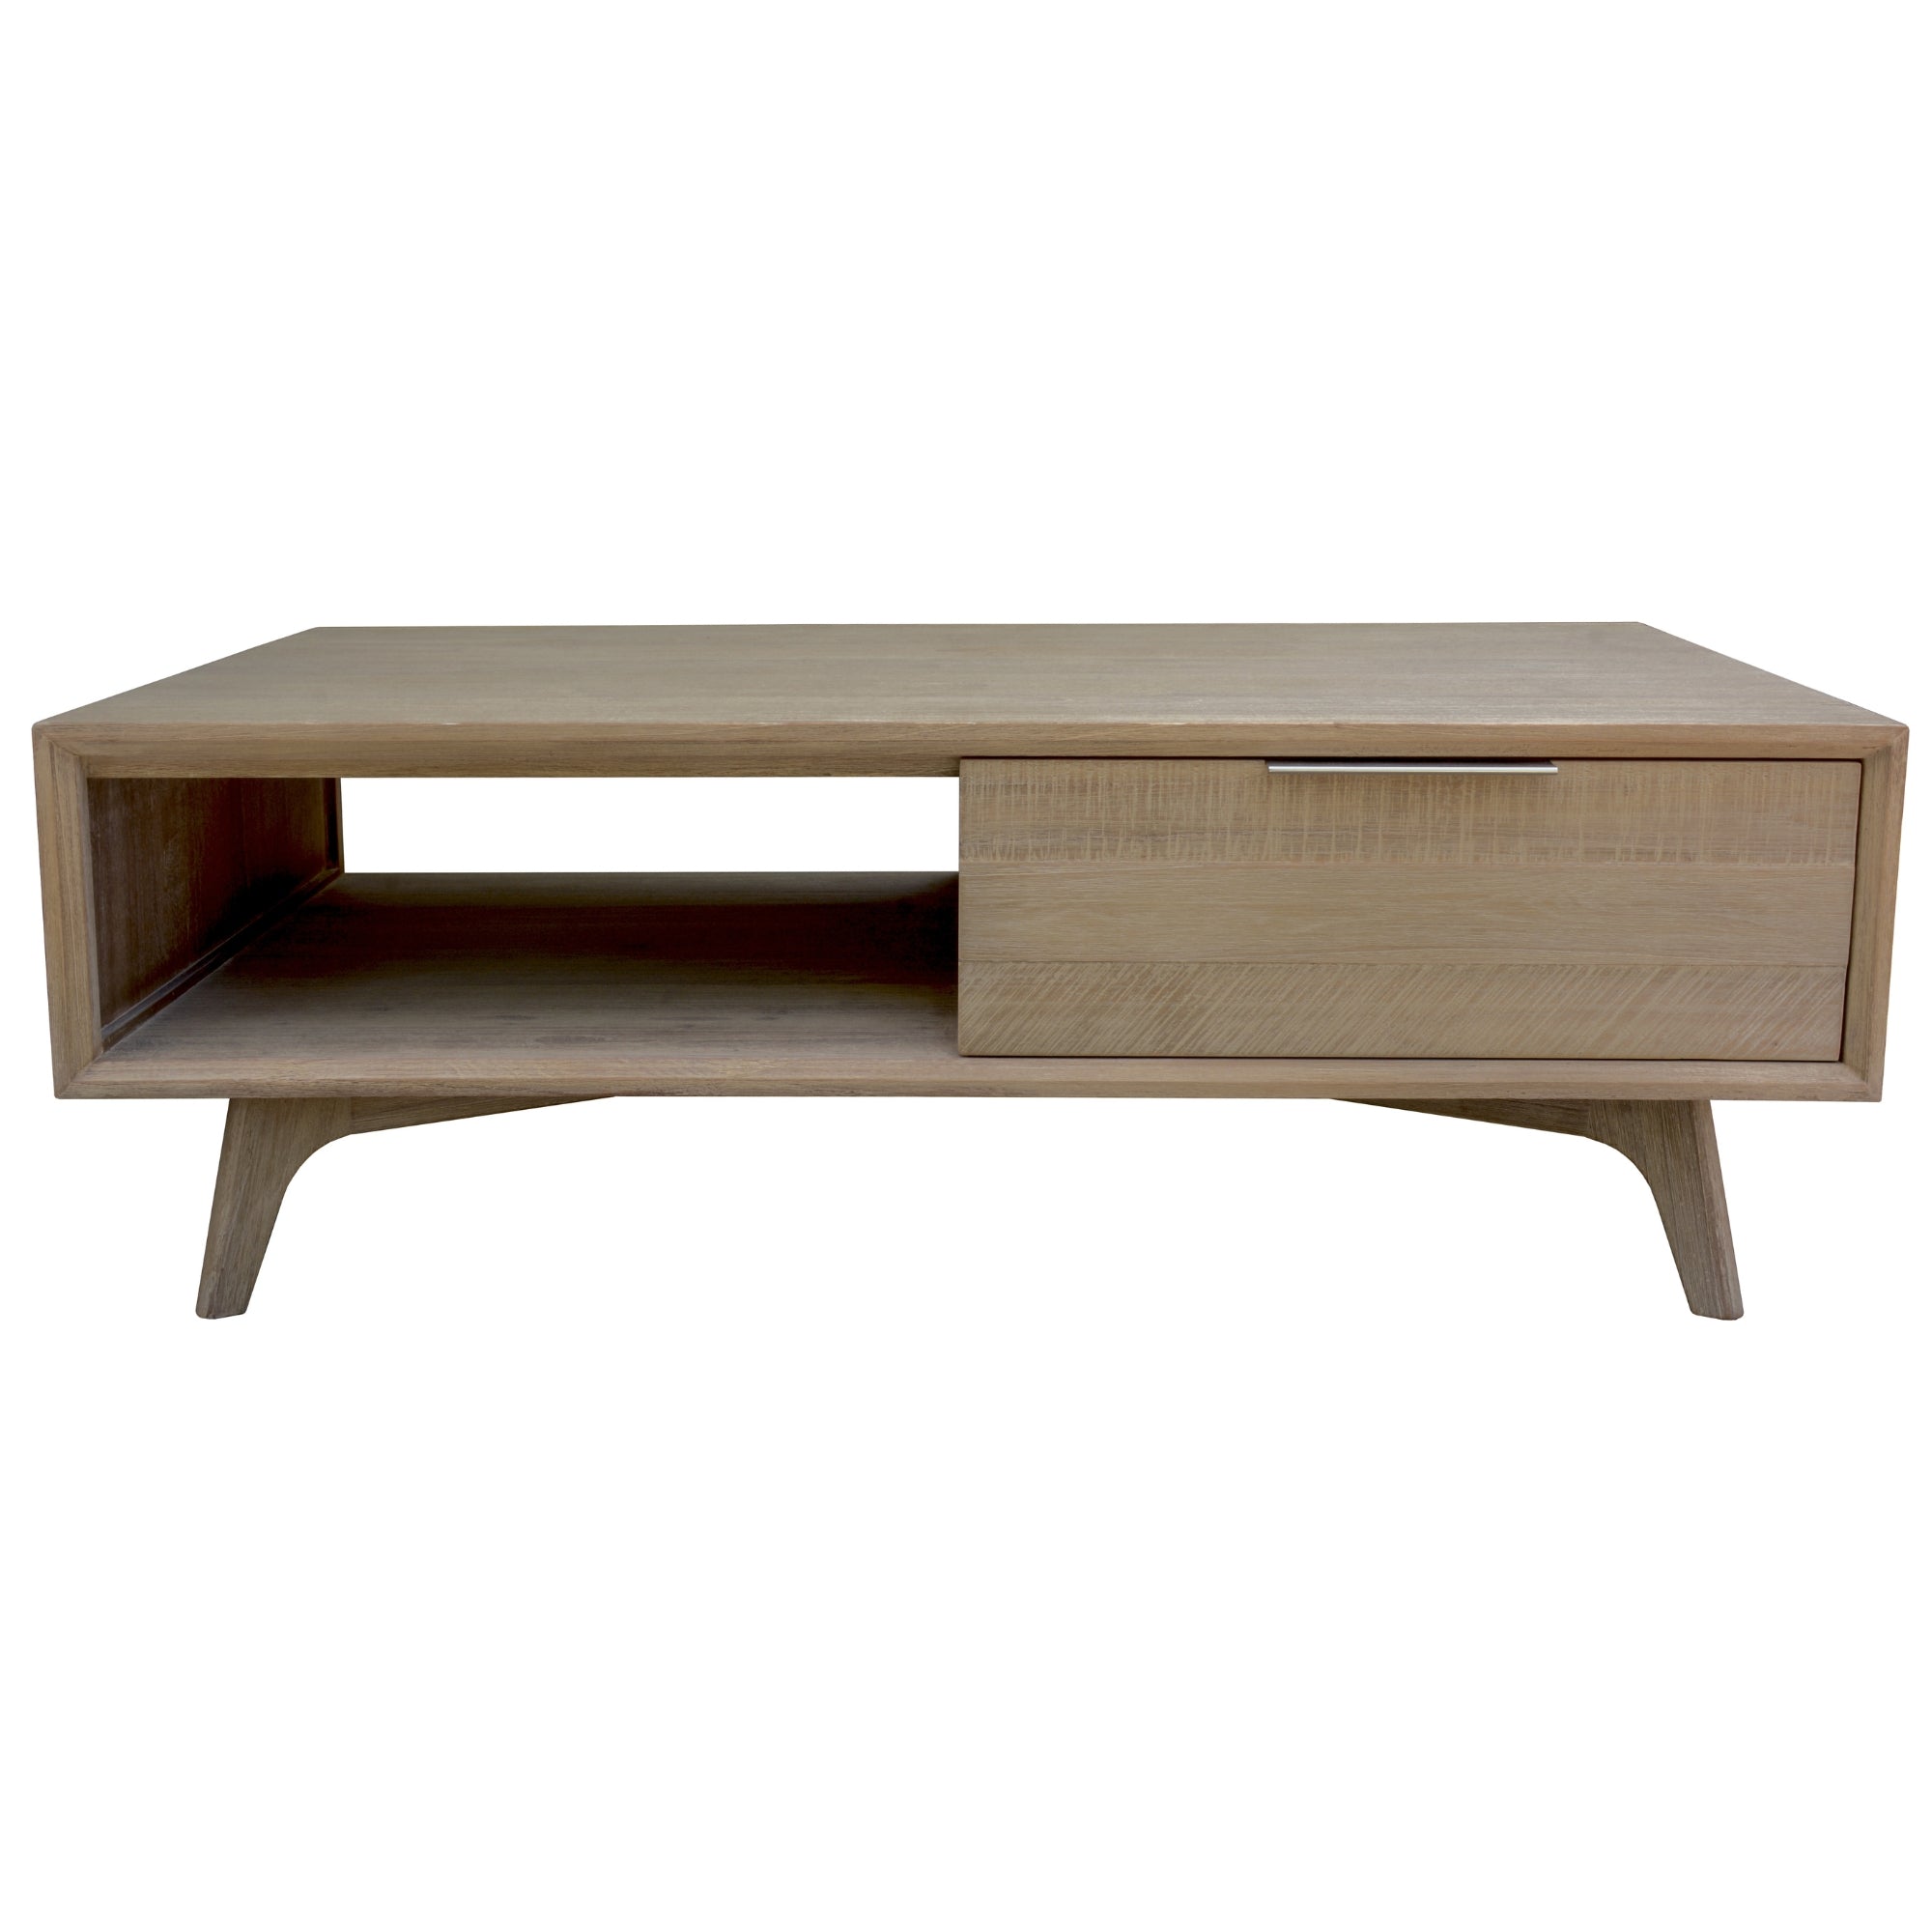 Solid Acacia Coffee Table 2 Drawer, Brushed Smoke, 130cm